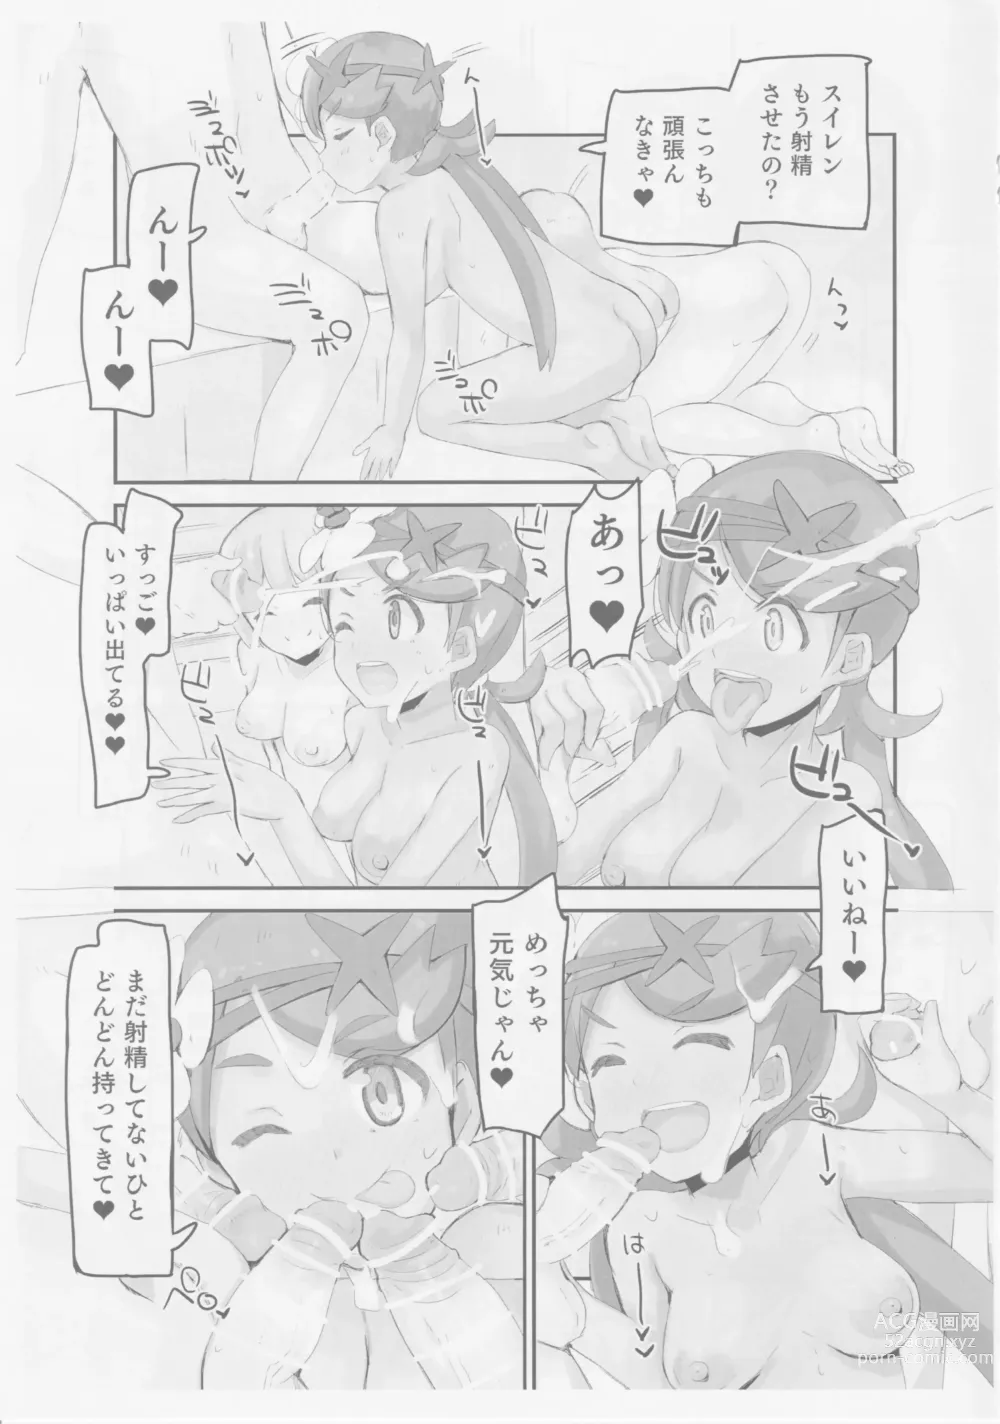 Page 9 of doujinshi Aloha Style Operation to get Pocket Money - Sugar Dating